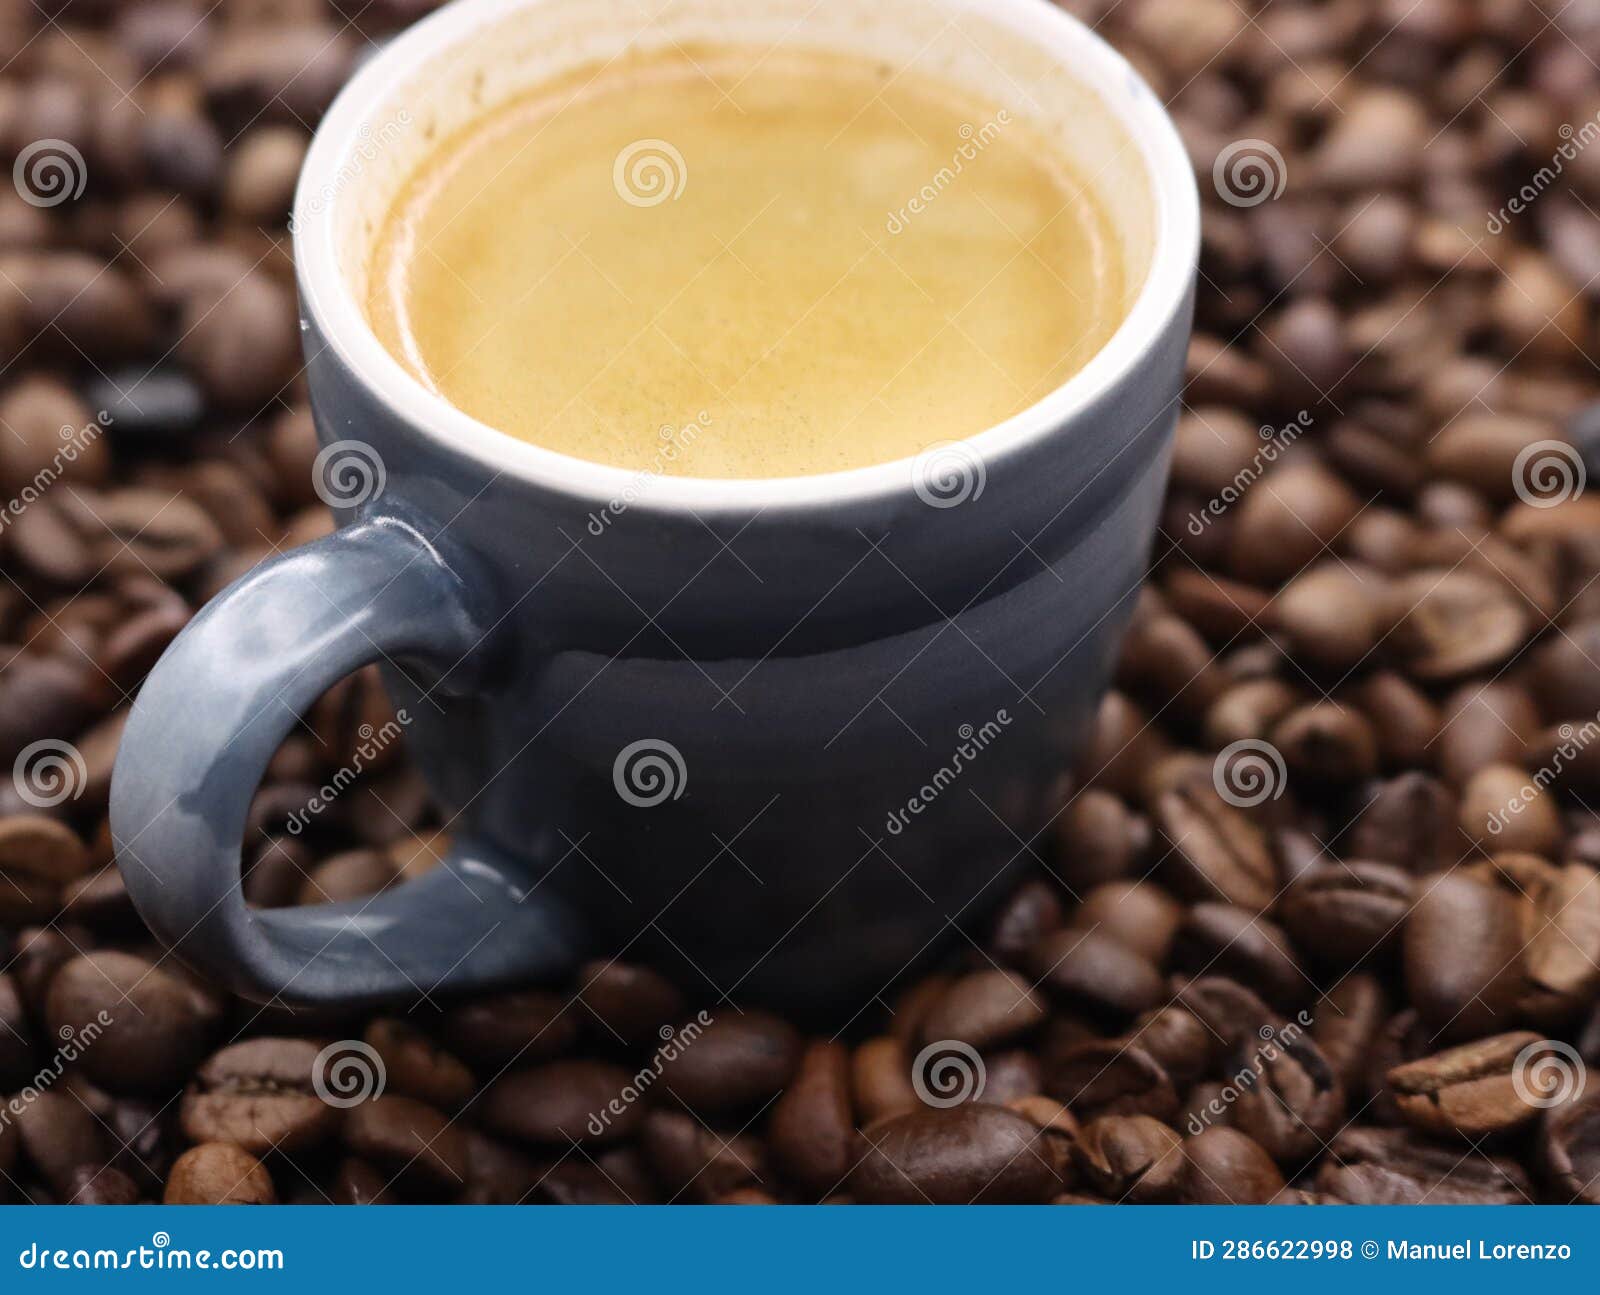 delicious cup of coffee aromatic tasty hot natural roasted grain